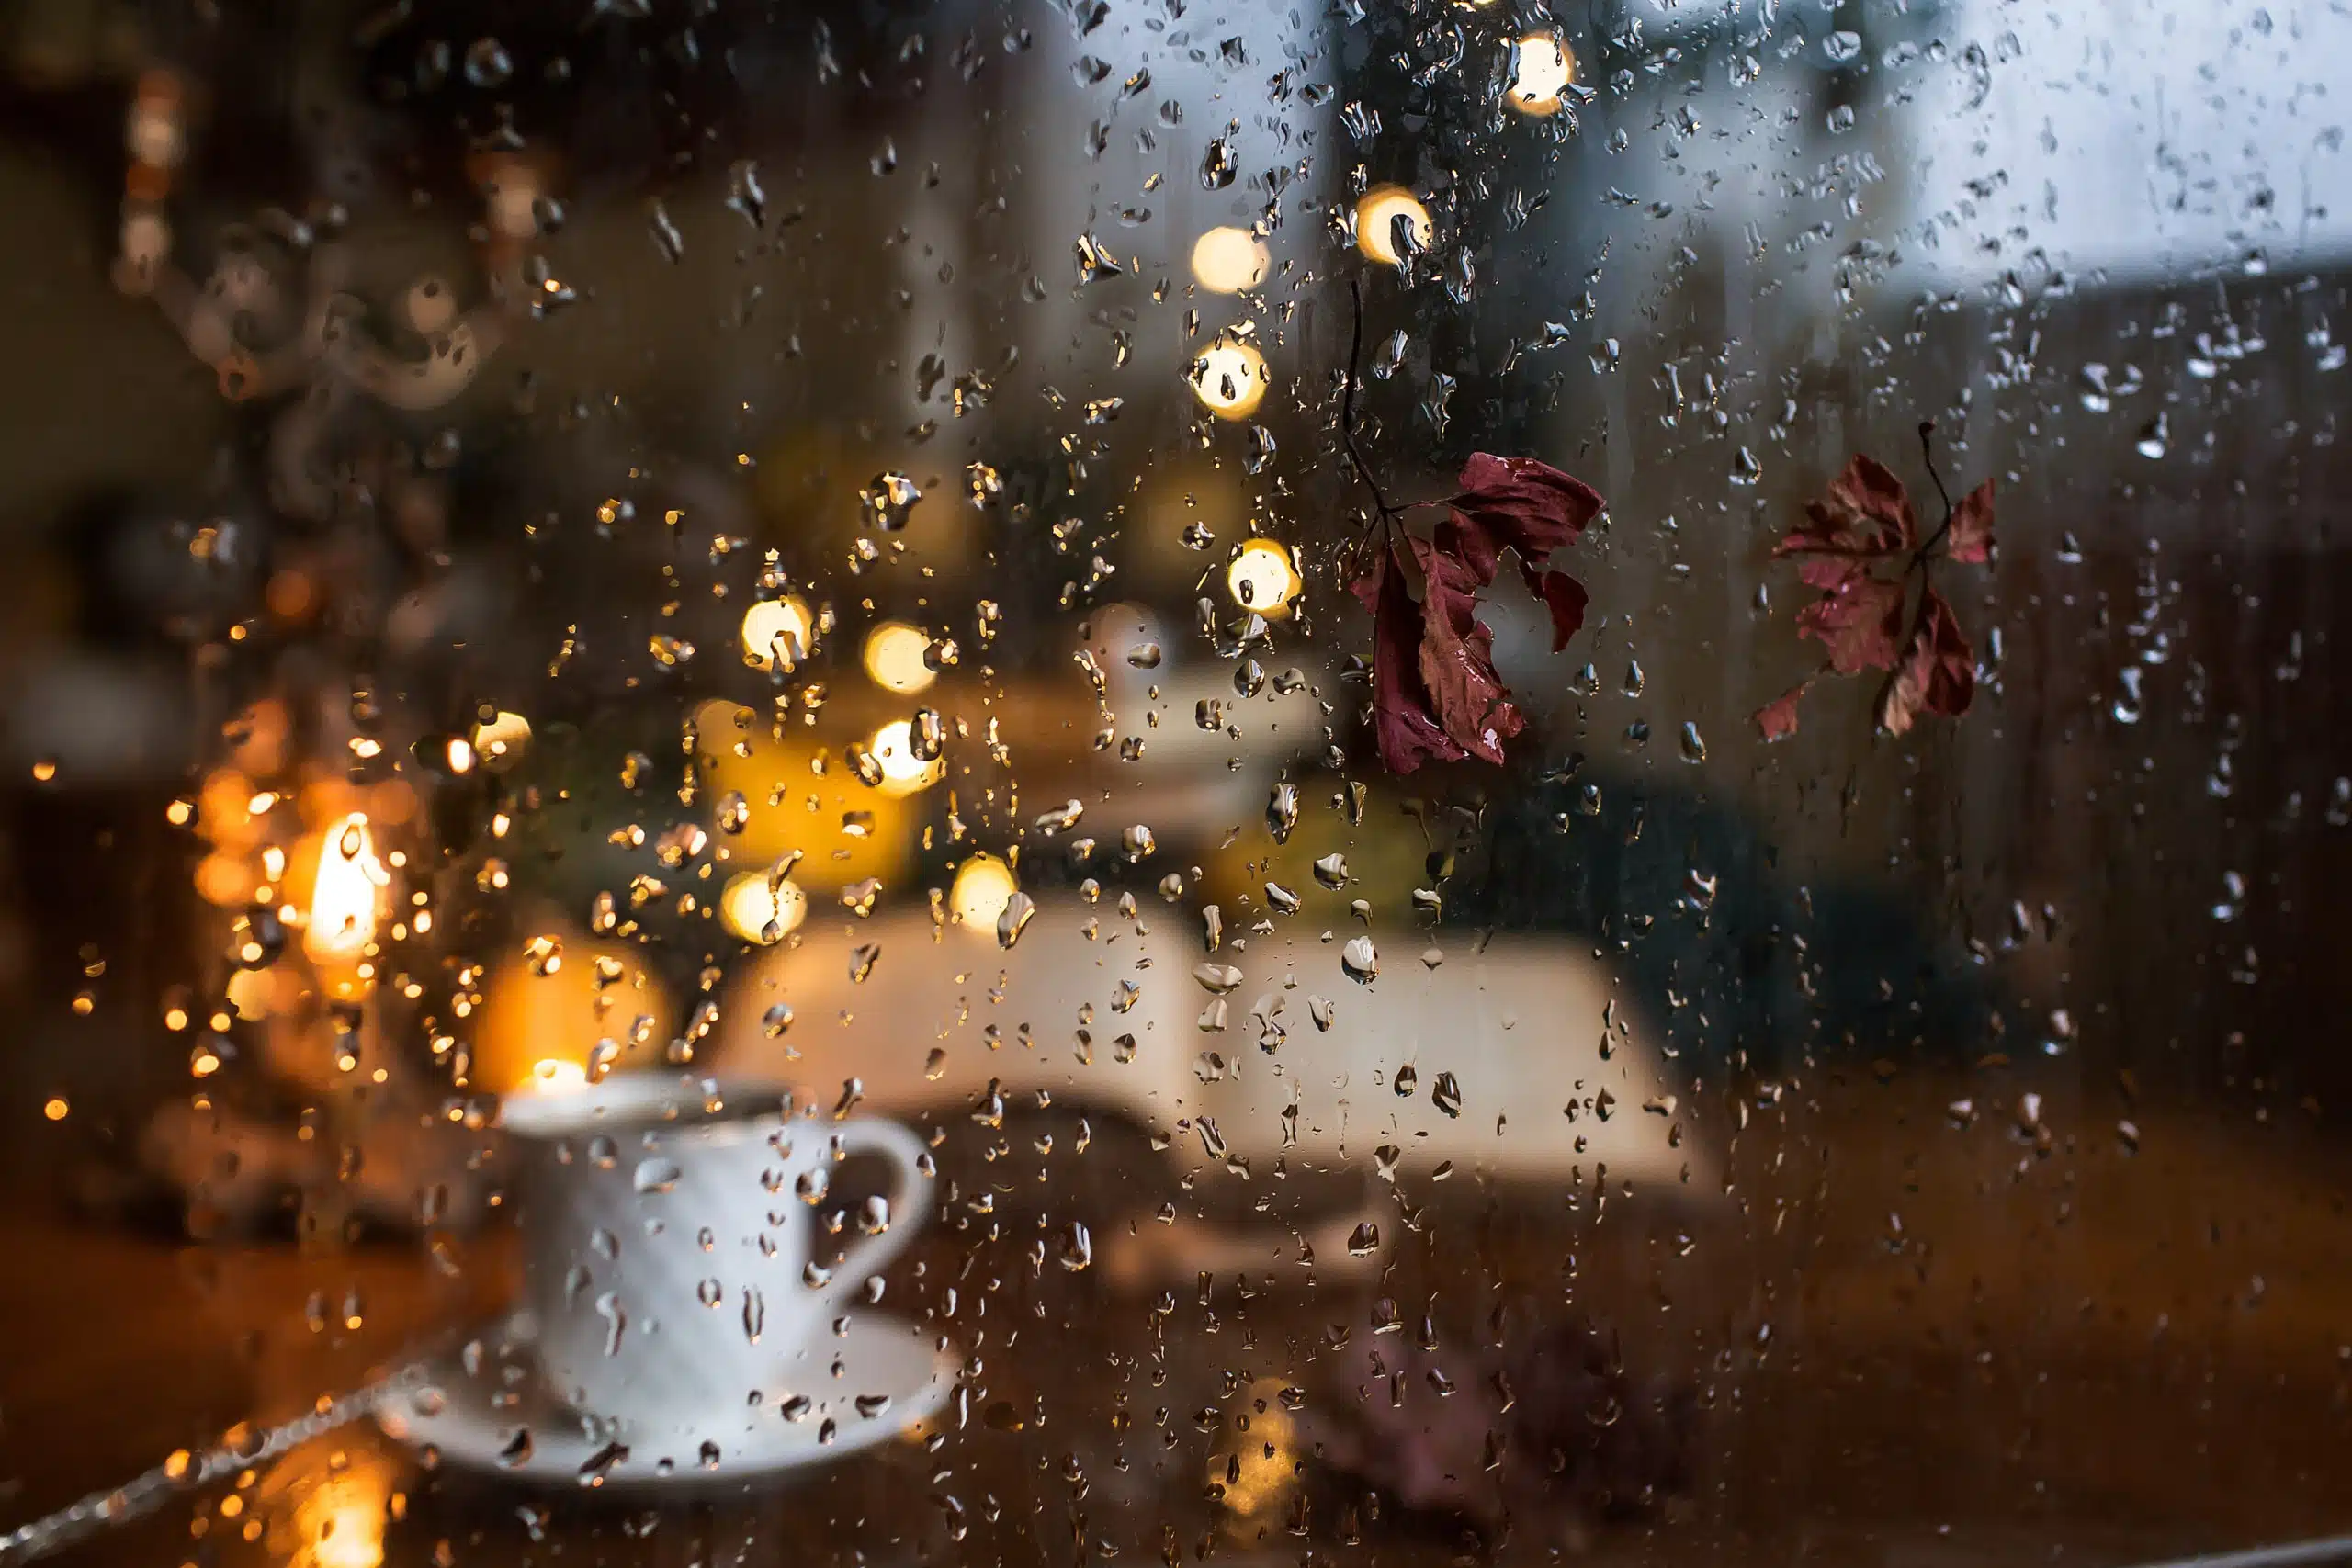 Raindrops, cup of coffee, and a book.